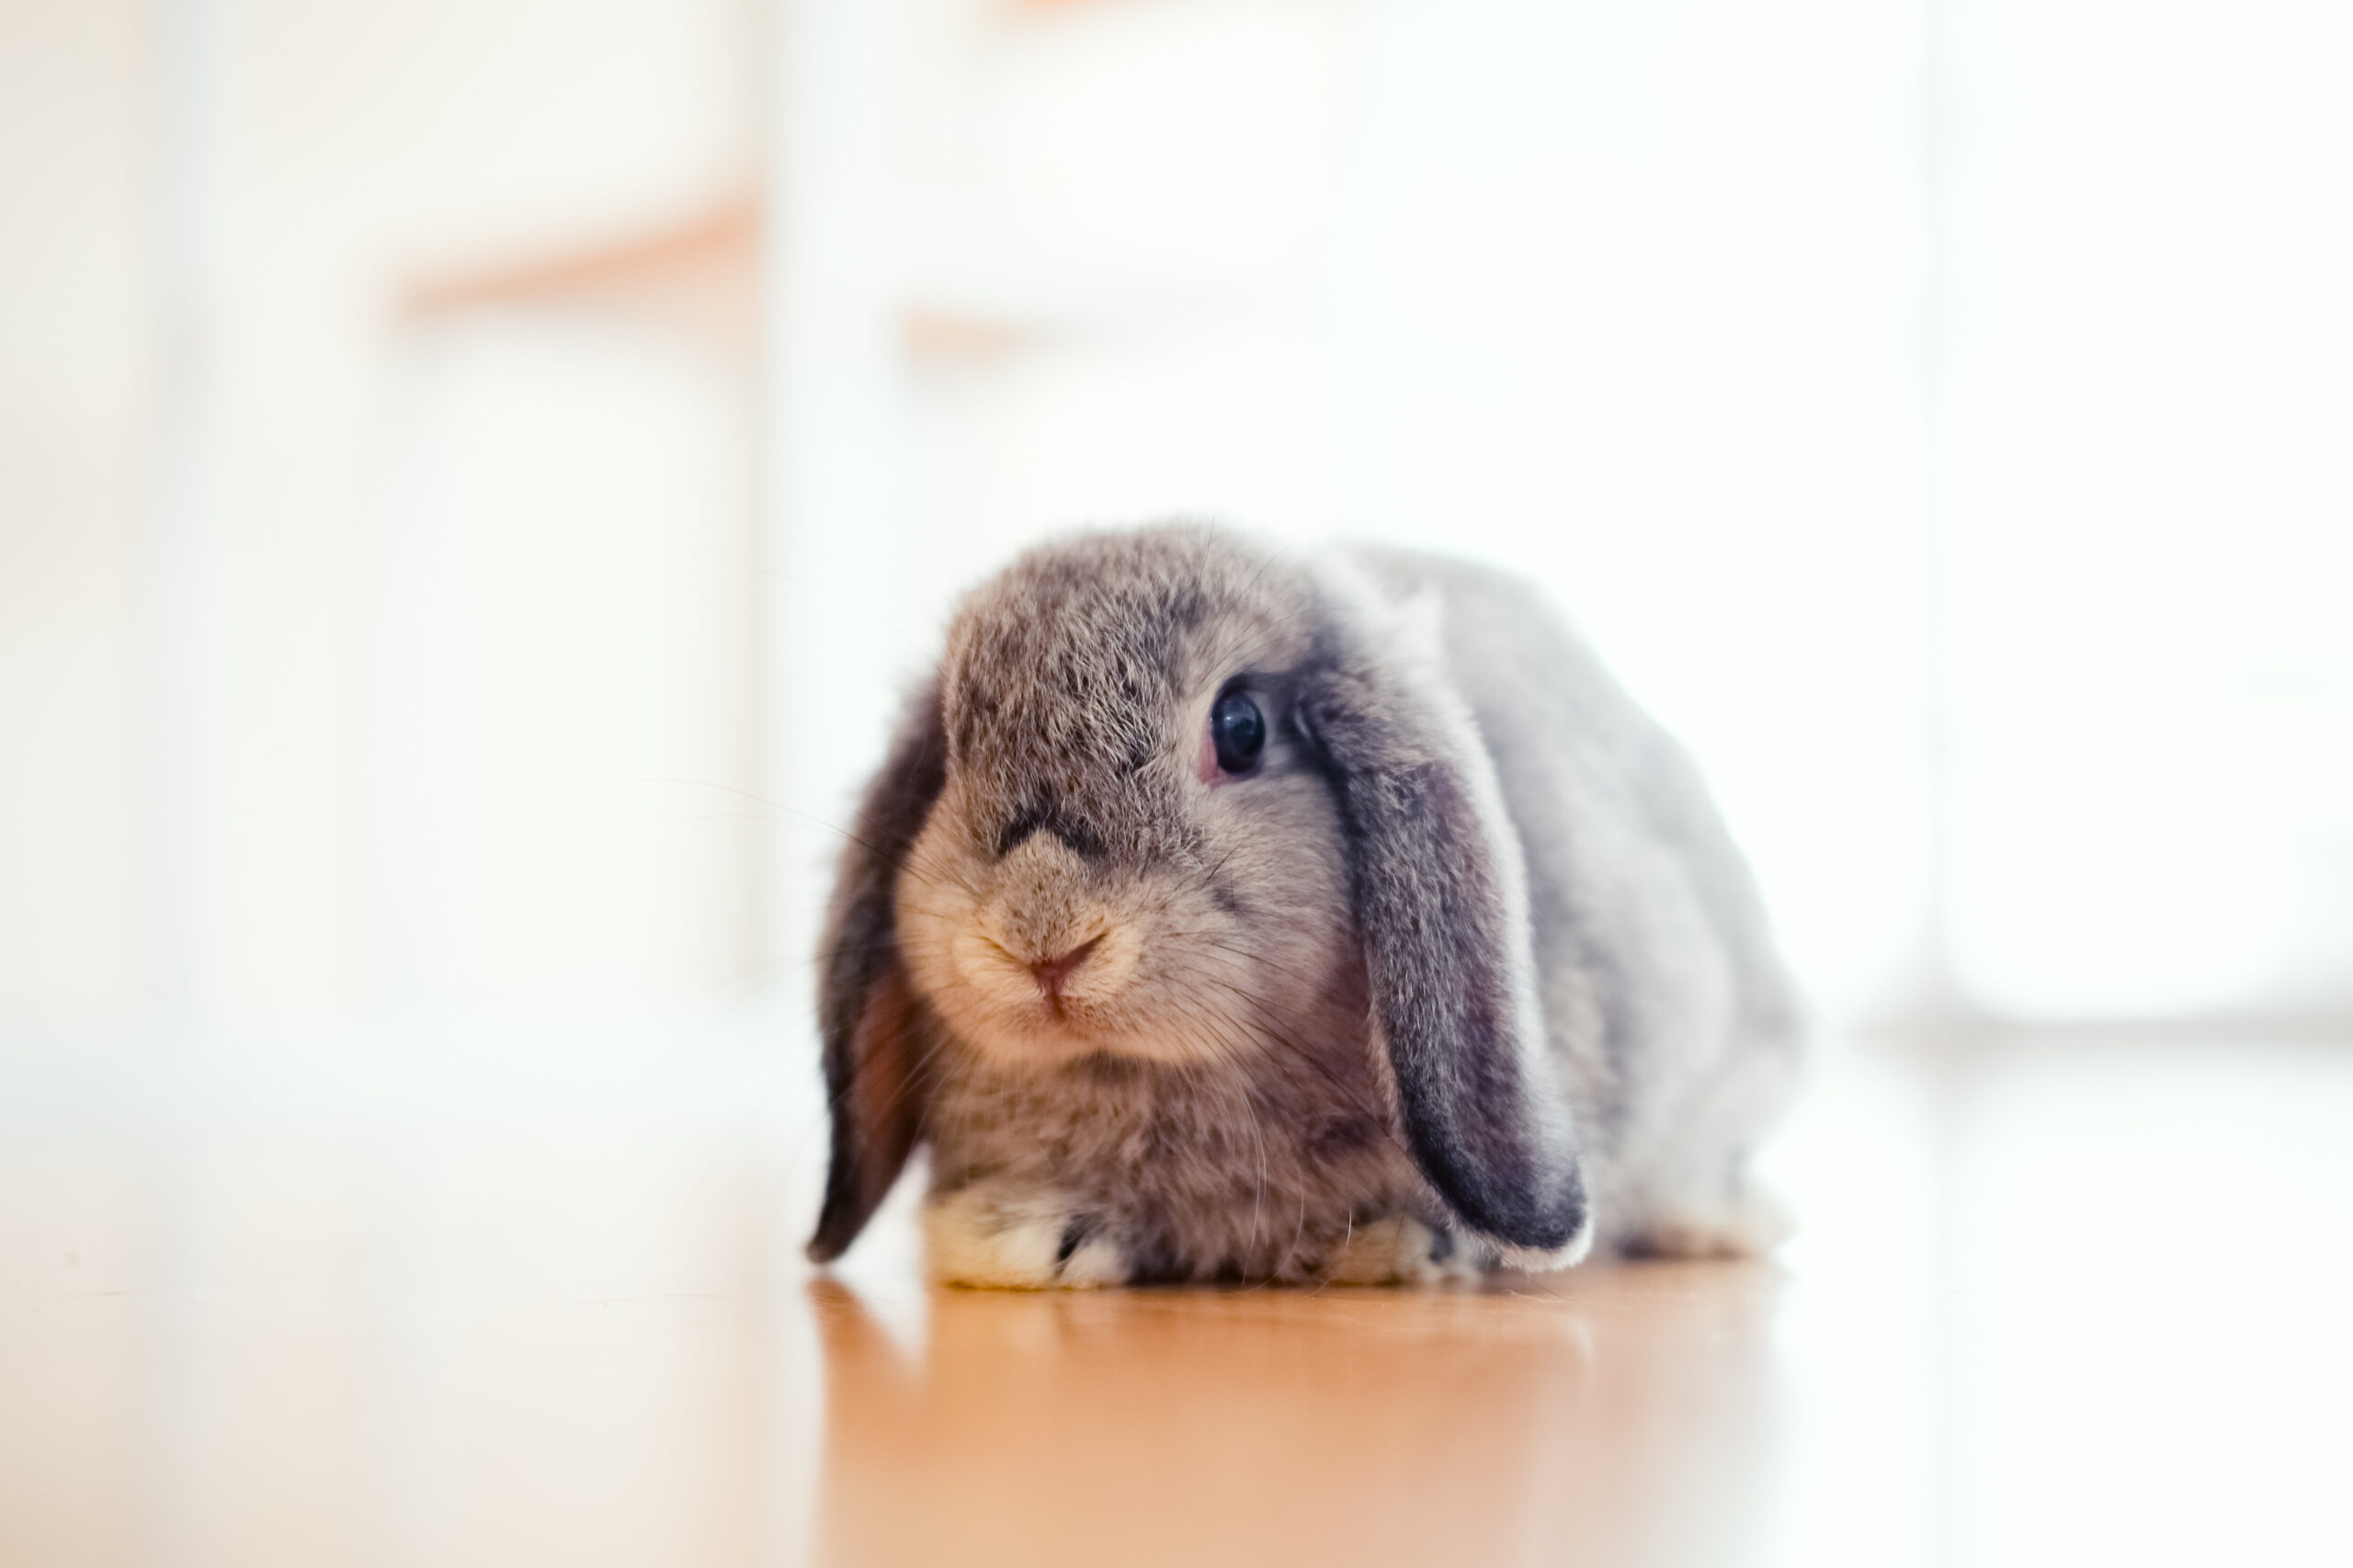 Pet insurance provides financial coverage for unexpected rabbit vet expenses, without putting a strain on your finances.